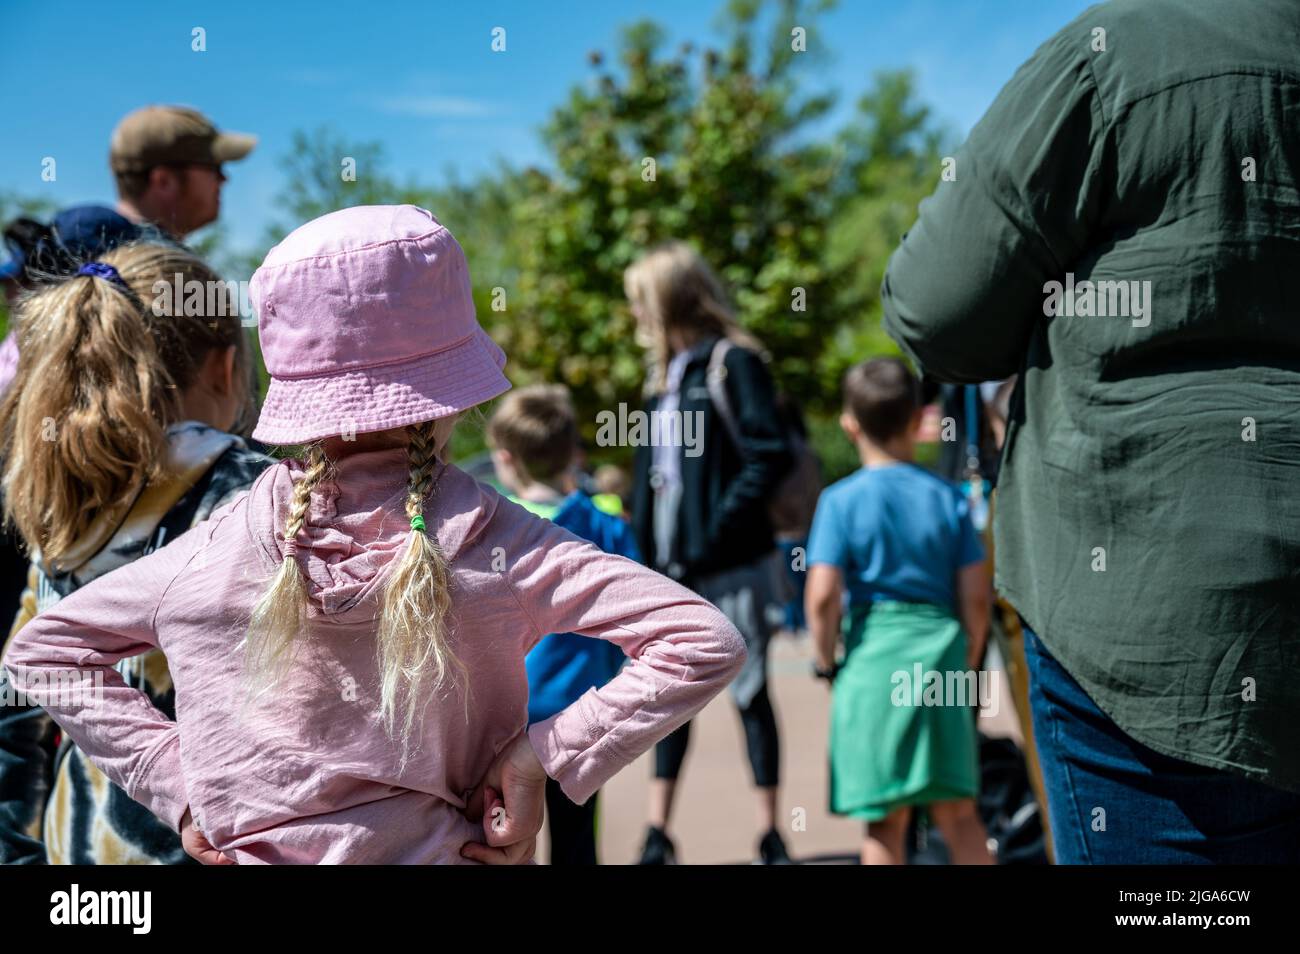 Elementary school class field trip to a outdoor zoo. Stock Photo